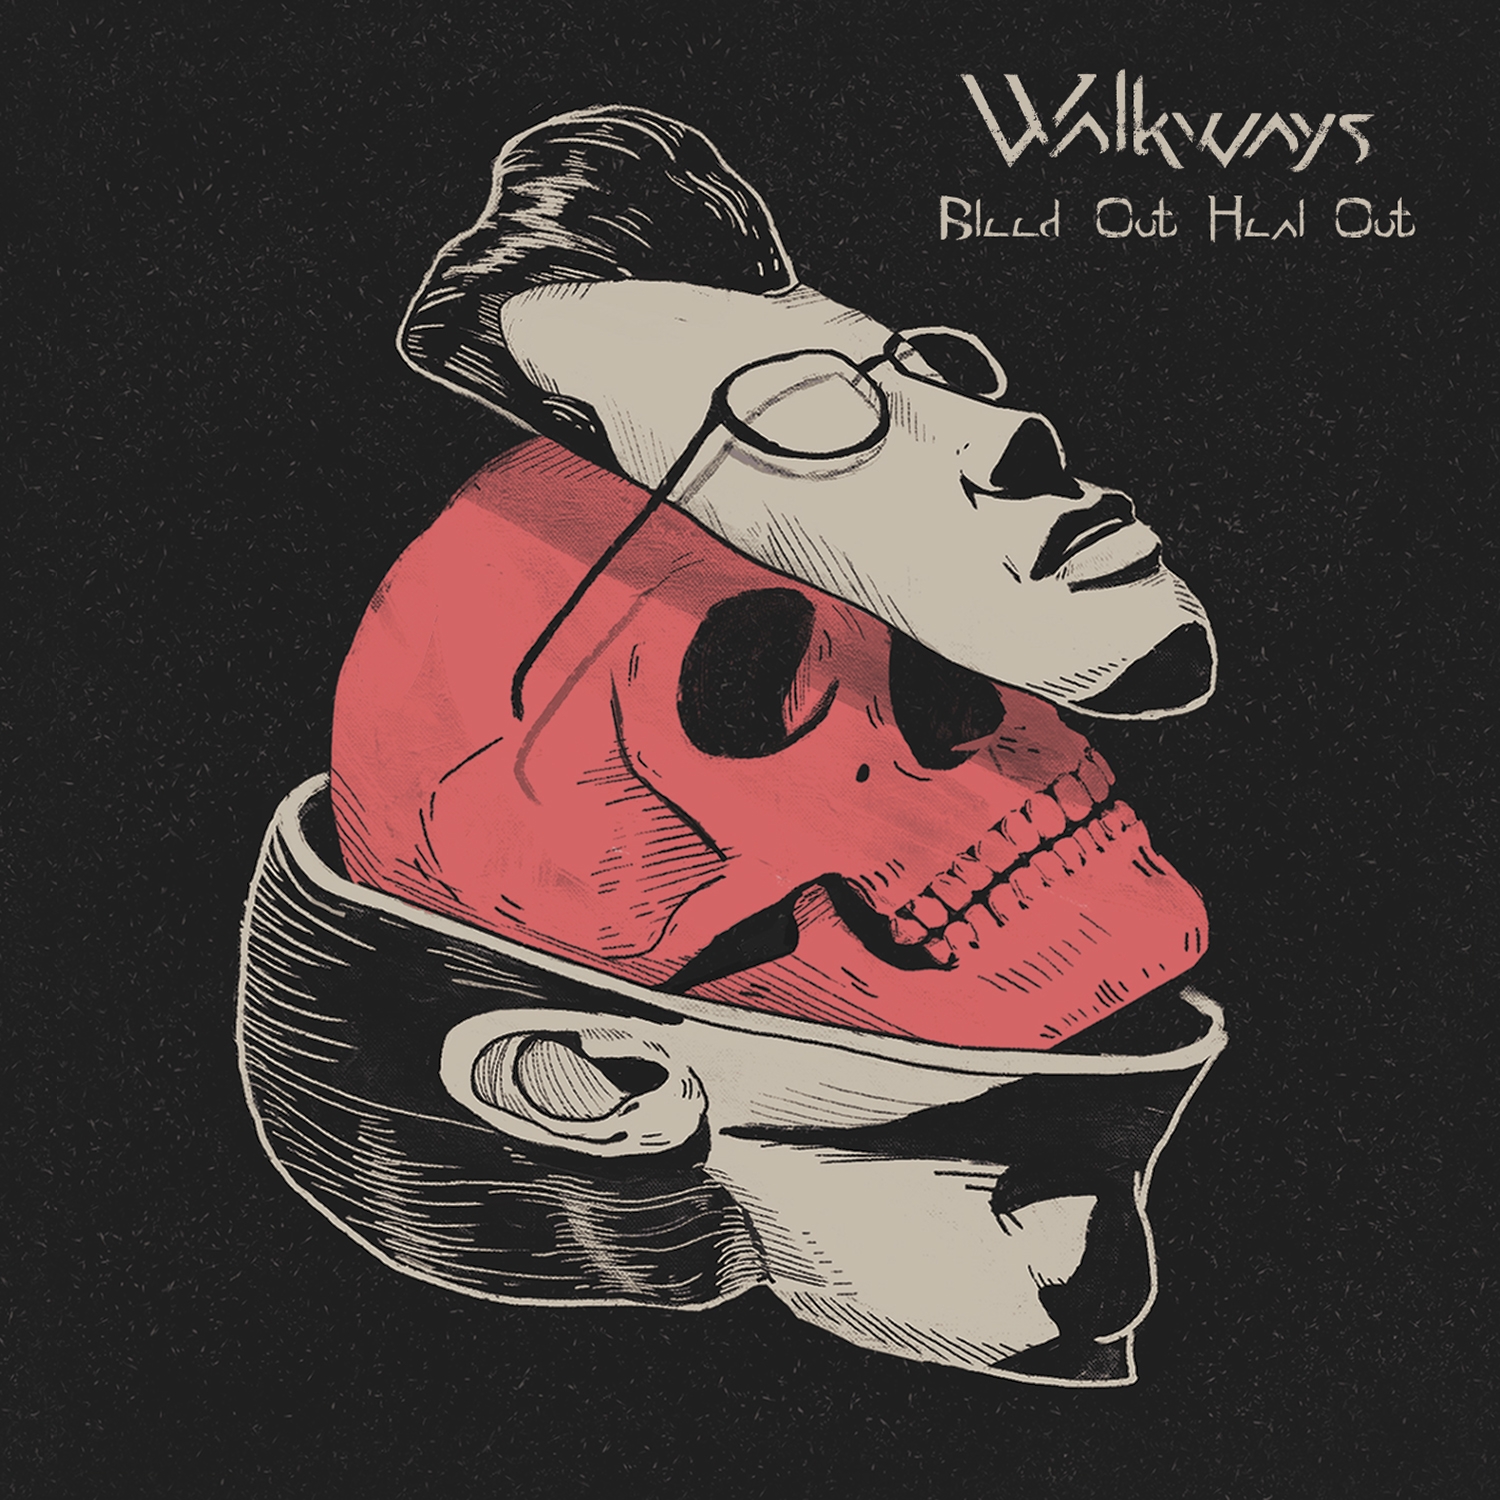 WALKWAYS – Bleed Out, Heal Out